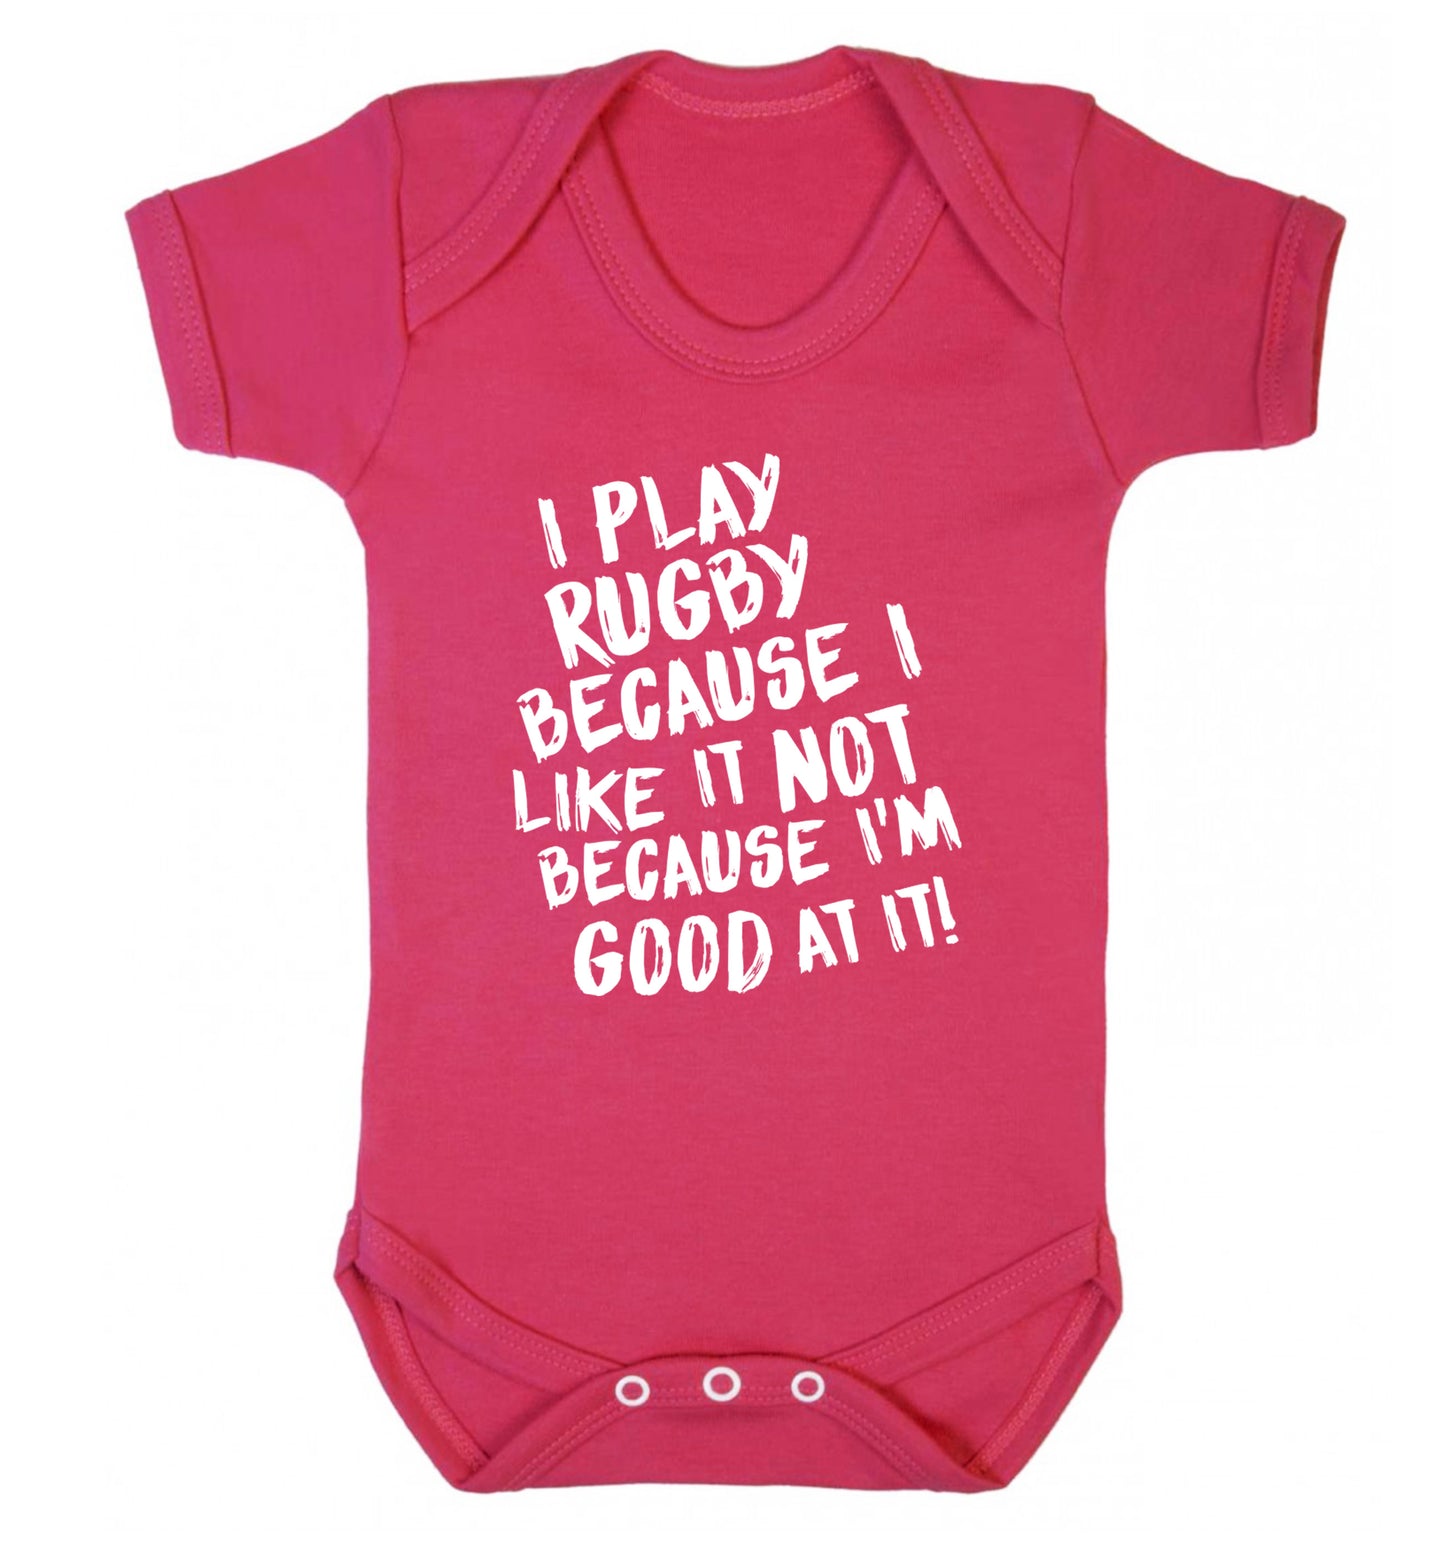 I play rugby because I like it not because I'm good at it Baby Vest dark pink 18-24 months